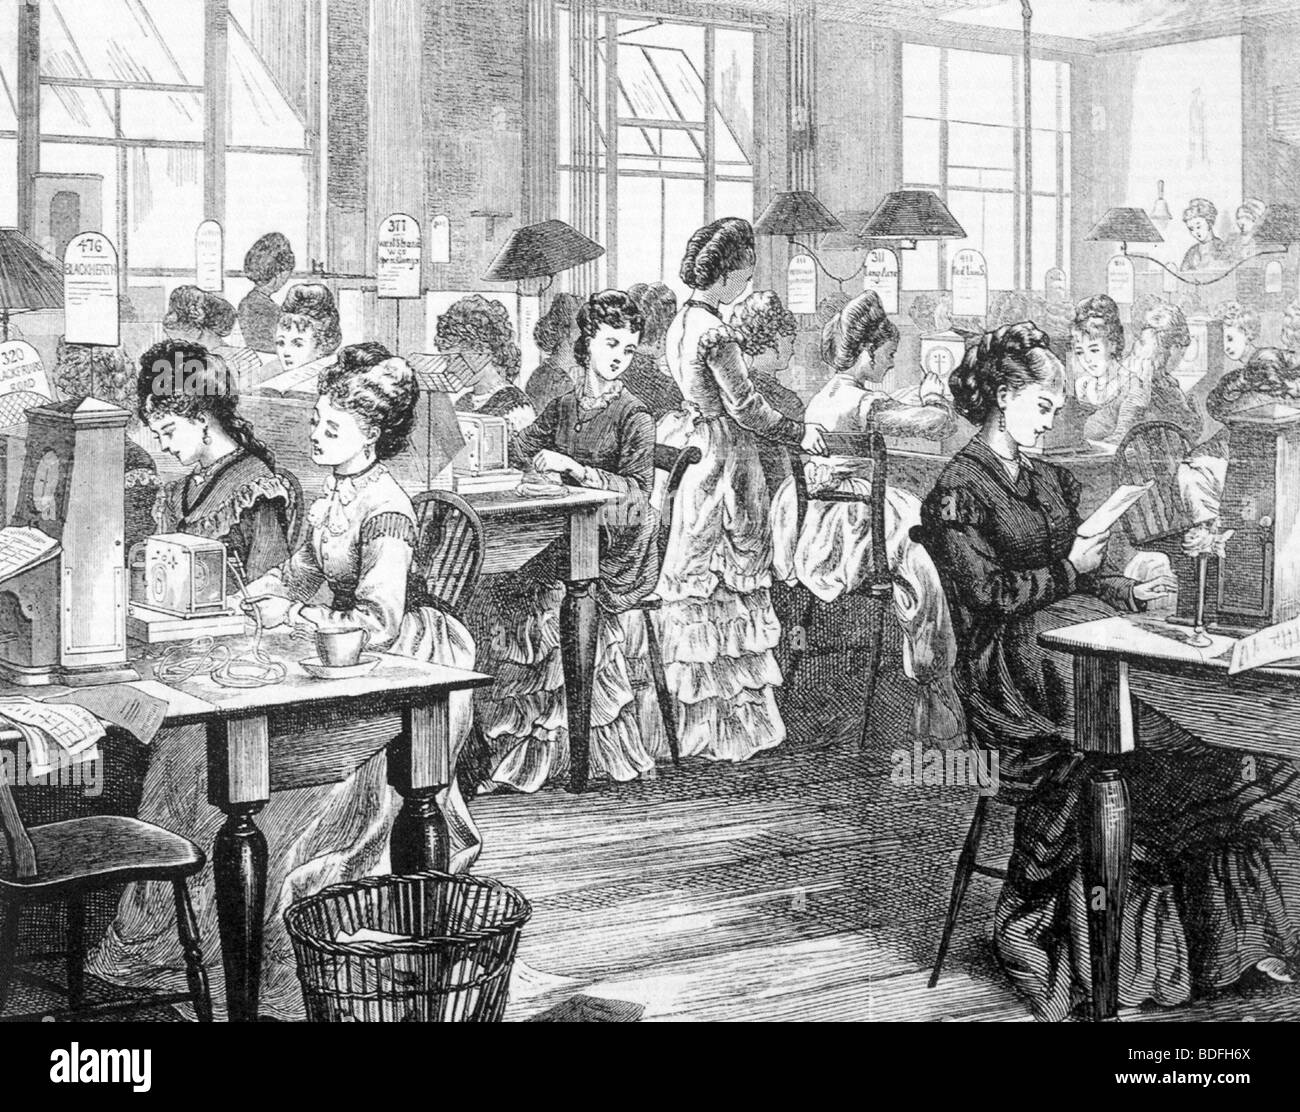 THE ELECTRIC TELEGRAPH COMPANY championed the employment of women operators at its London offices as seen in this 1870 engraving Stock Photo